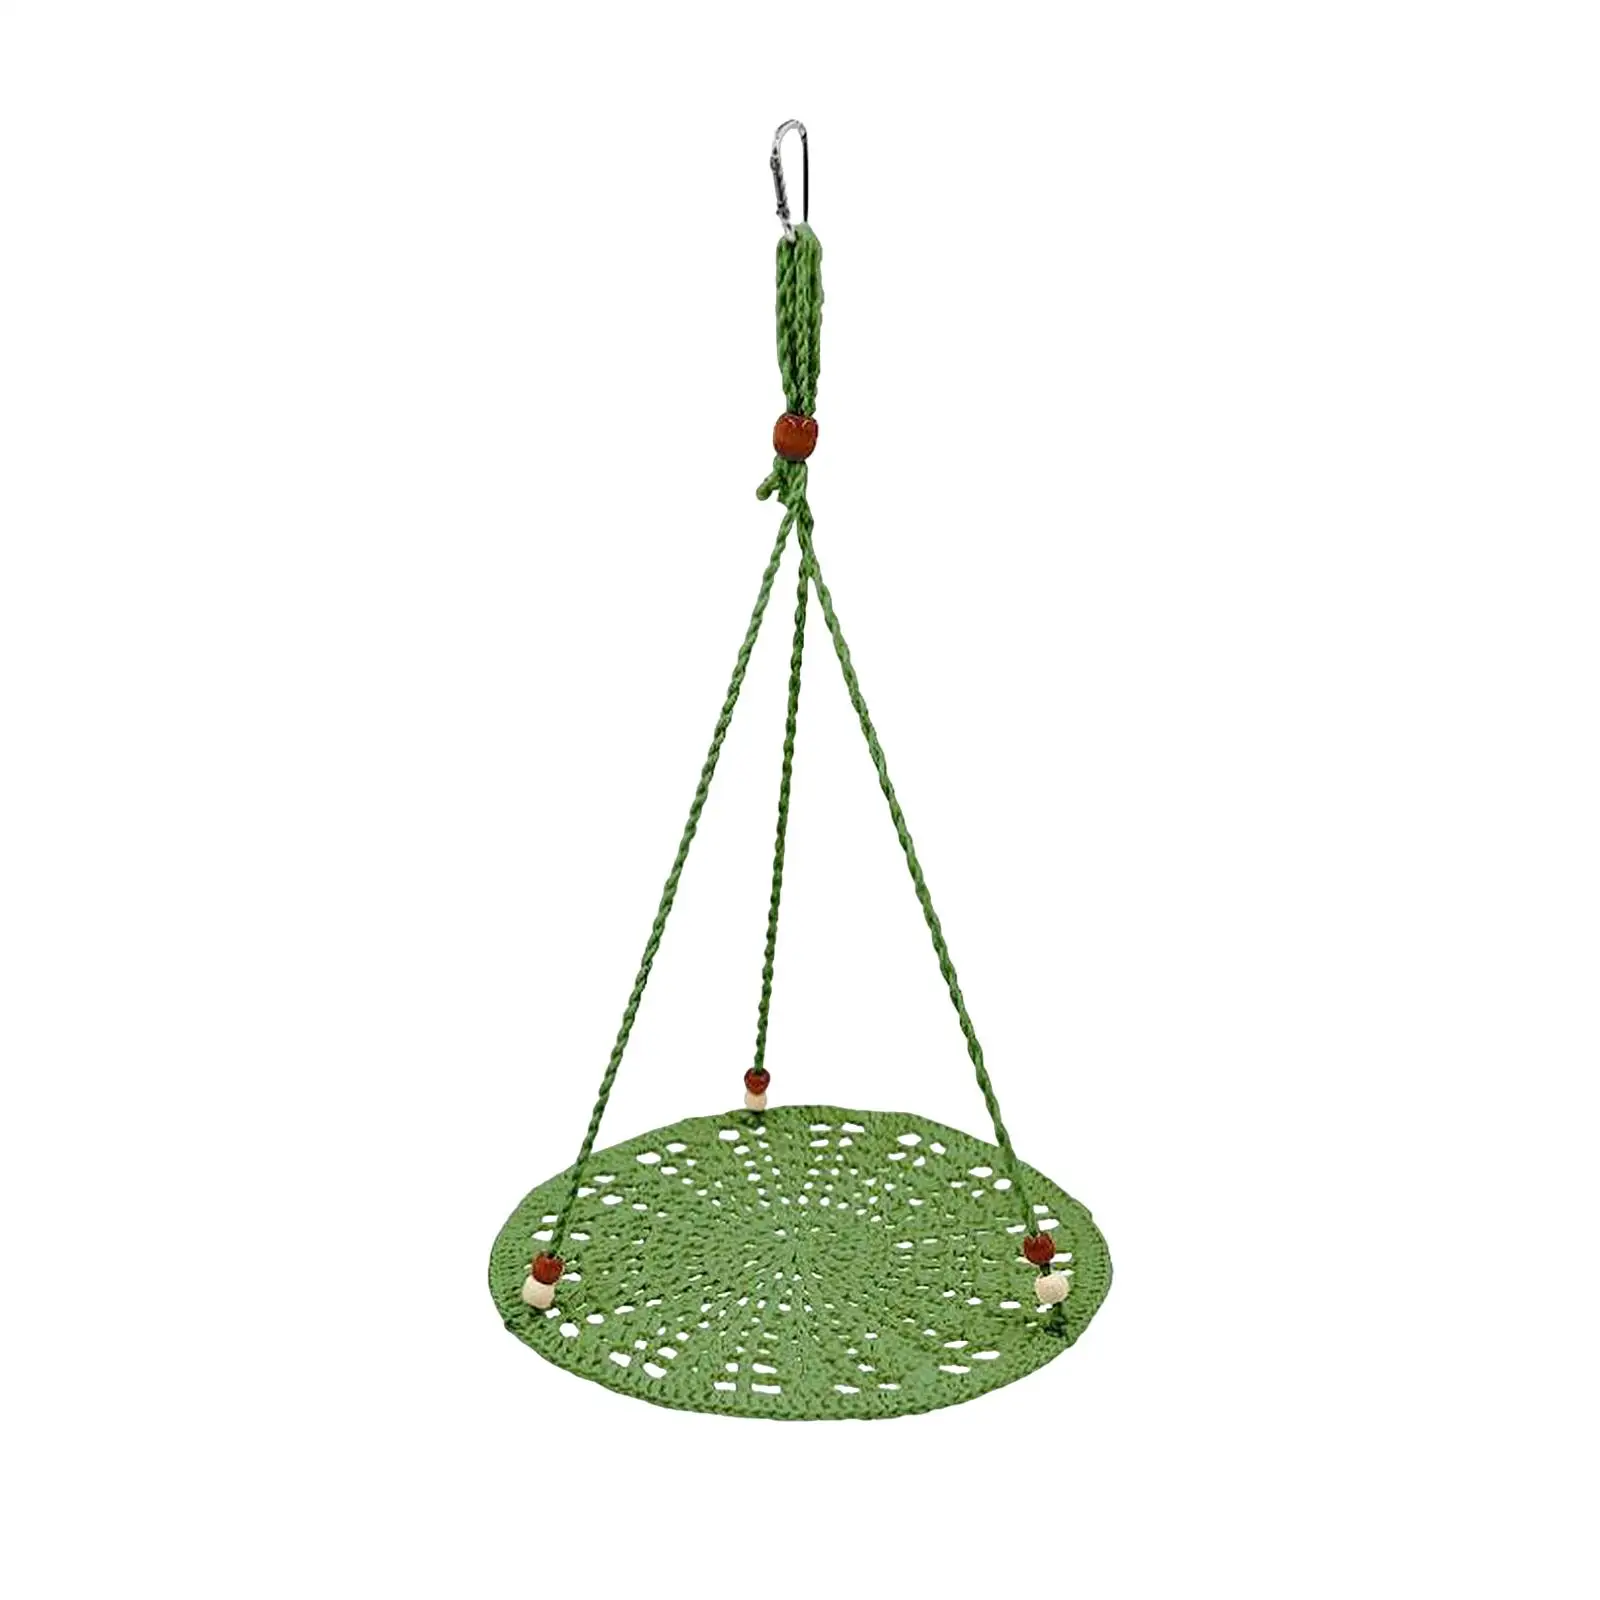 Reptile Hammock Swing Hanging Bed Lounge Breathable Mat Sleeping Bed Climbing